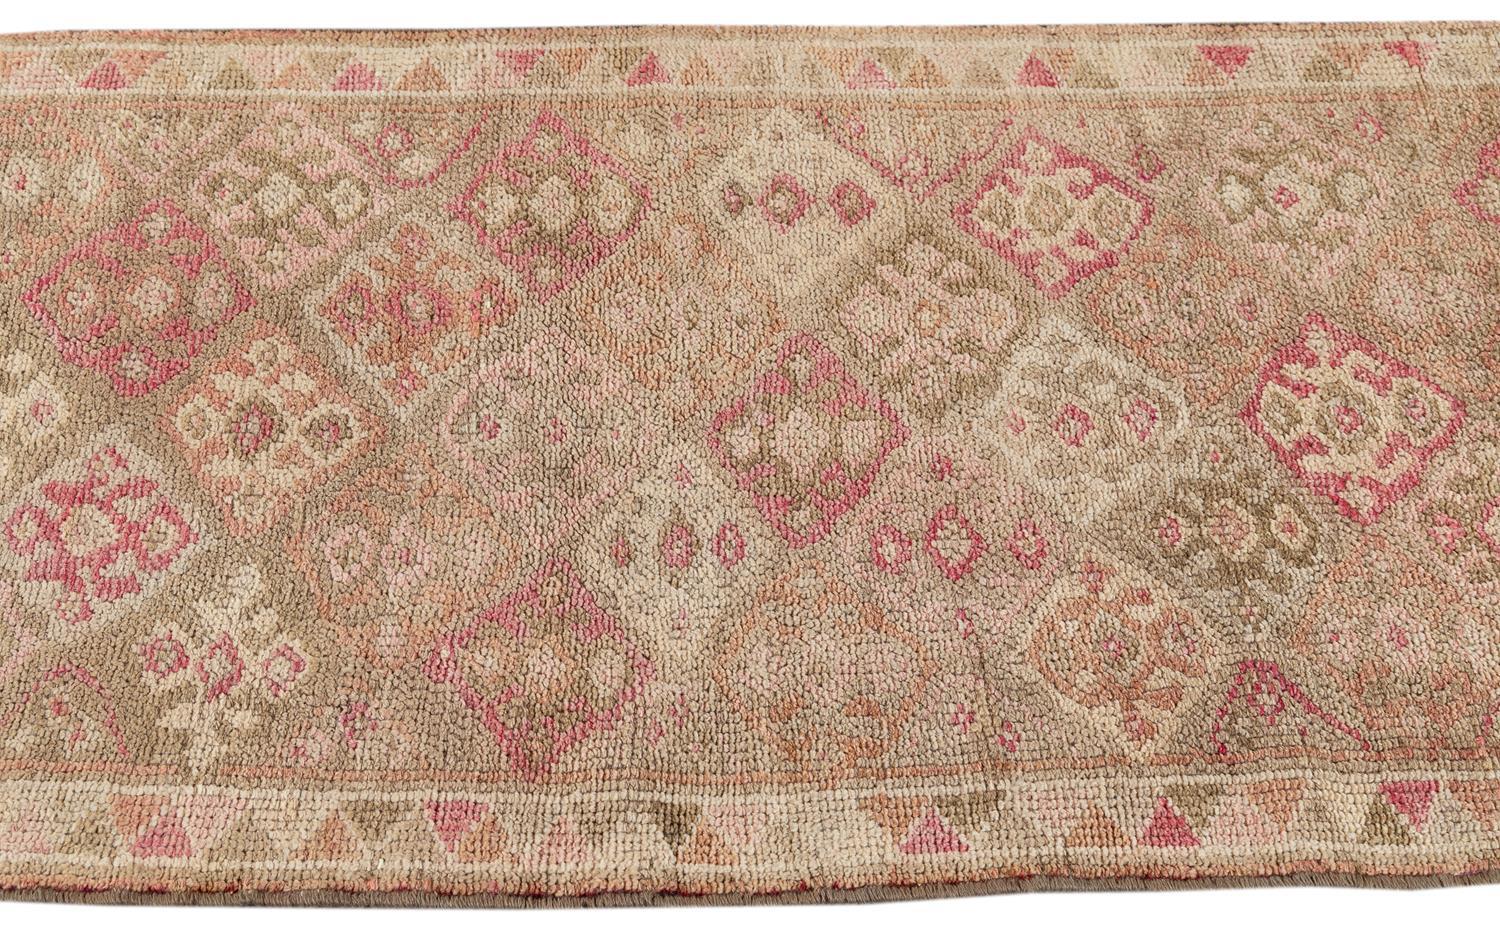 Early 20th Century Anatolian Village Runner Rug In Good Condition For Sale In Norwalk, CT